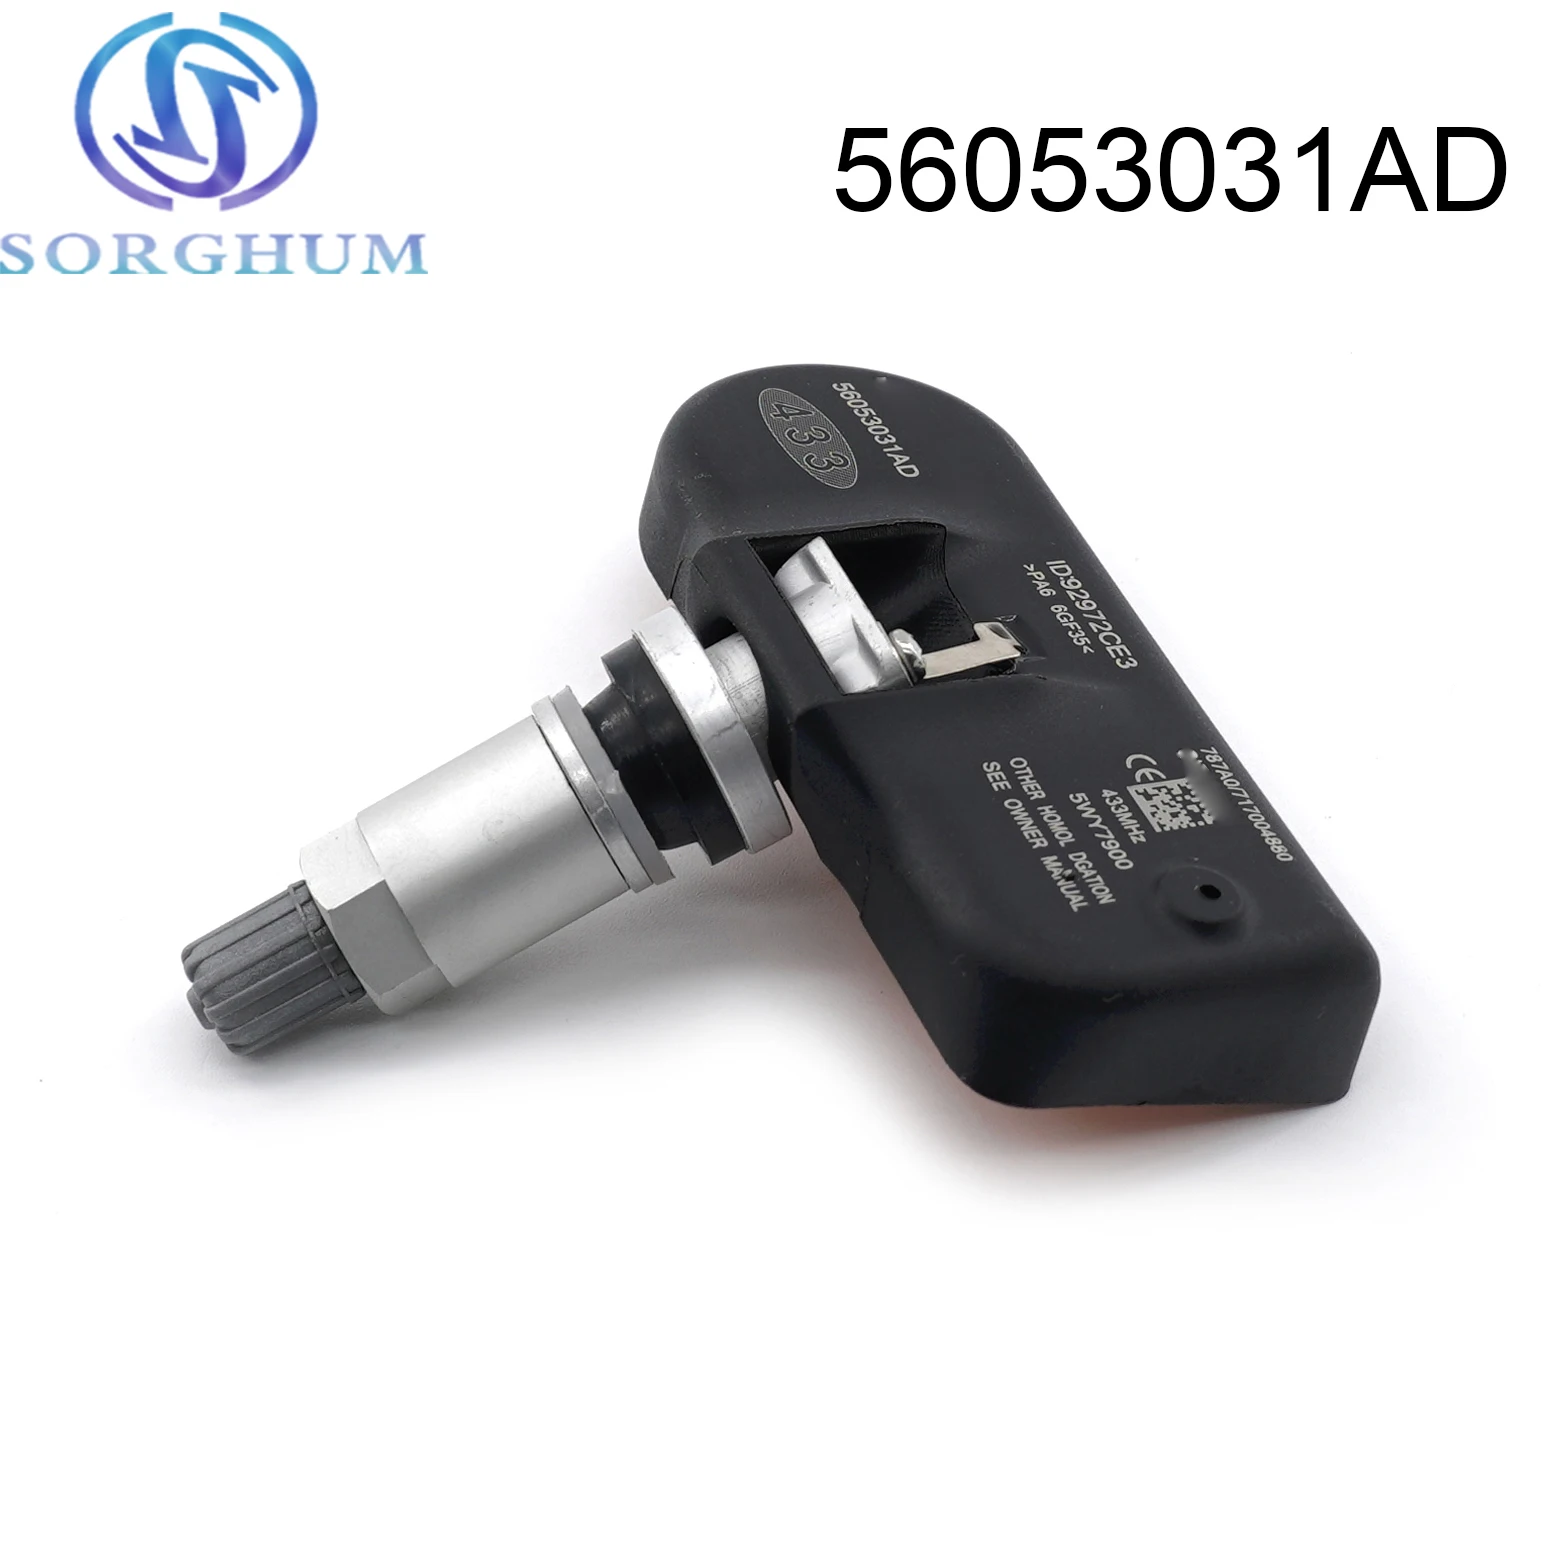 

56053031AD TPMS Tire Pressure Sensor 433 MHz For Chrysler Sebring Town & Country For Dodge Journey Car Accessories